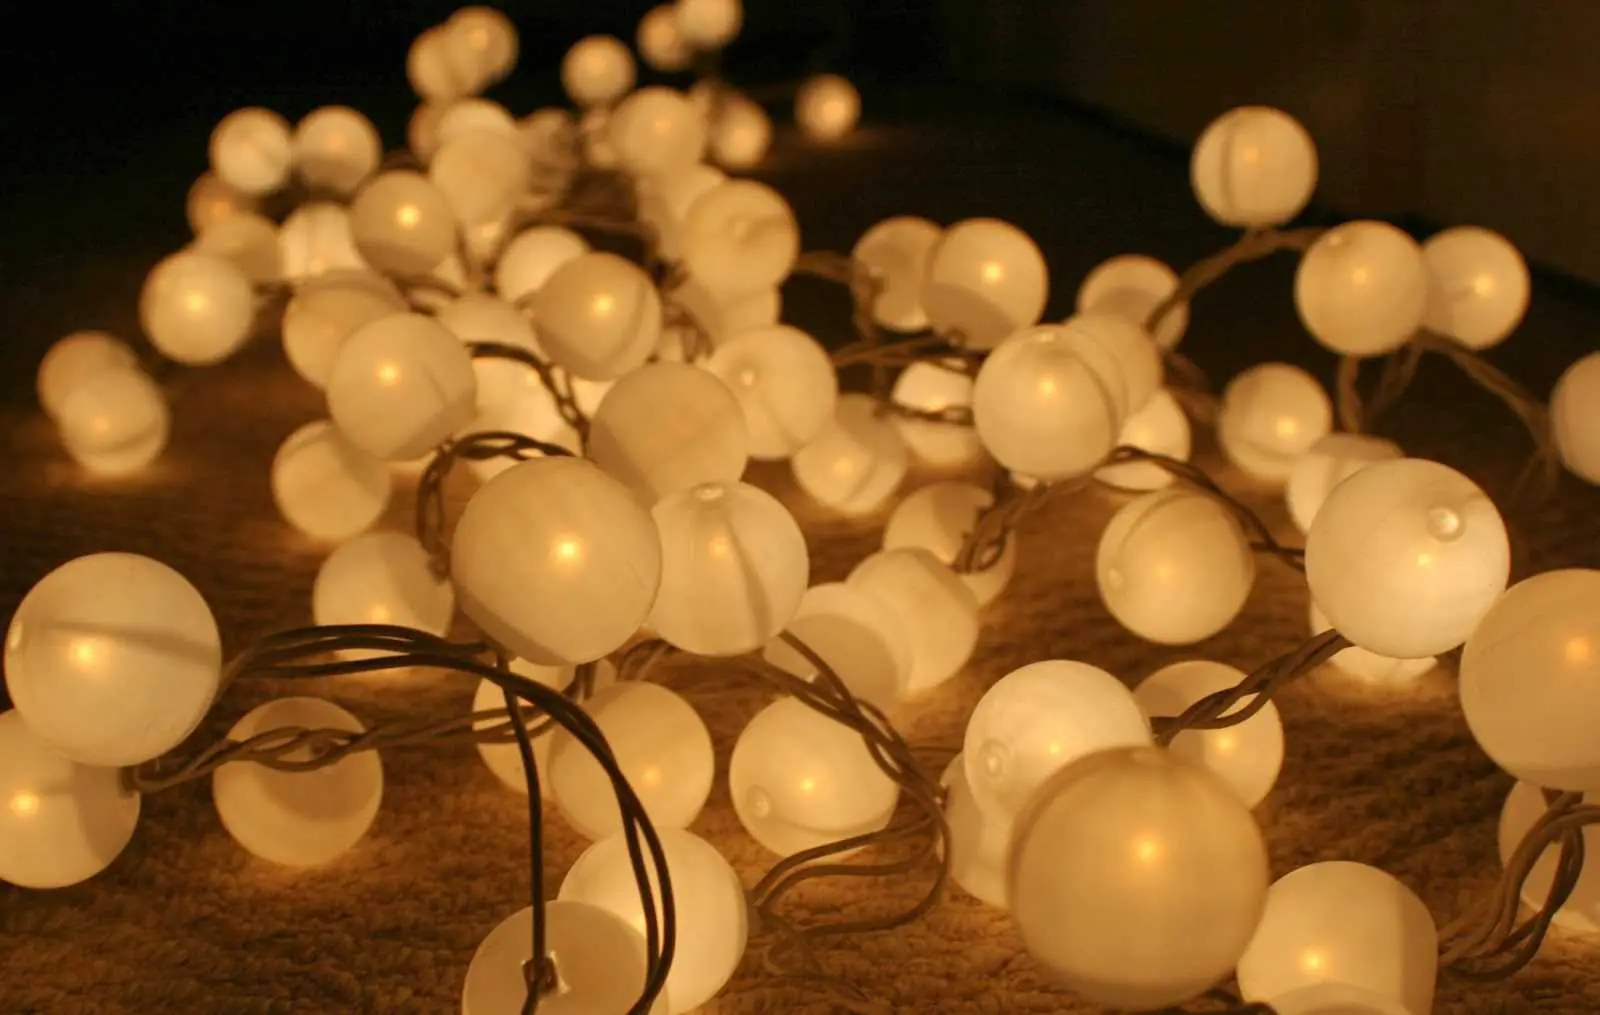 20+ Best DIY String Light Ideas For Your Home Decor, DIY Ping Pong Ball Lights